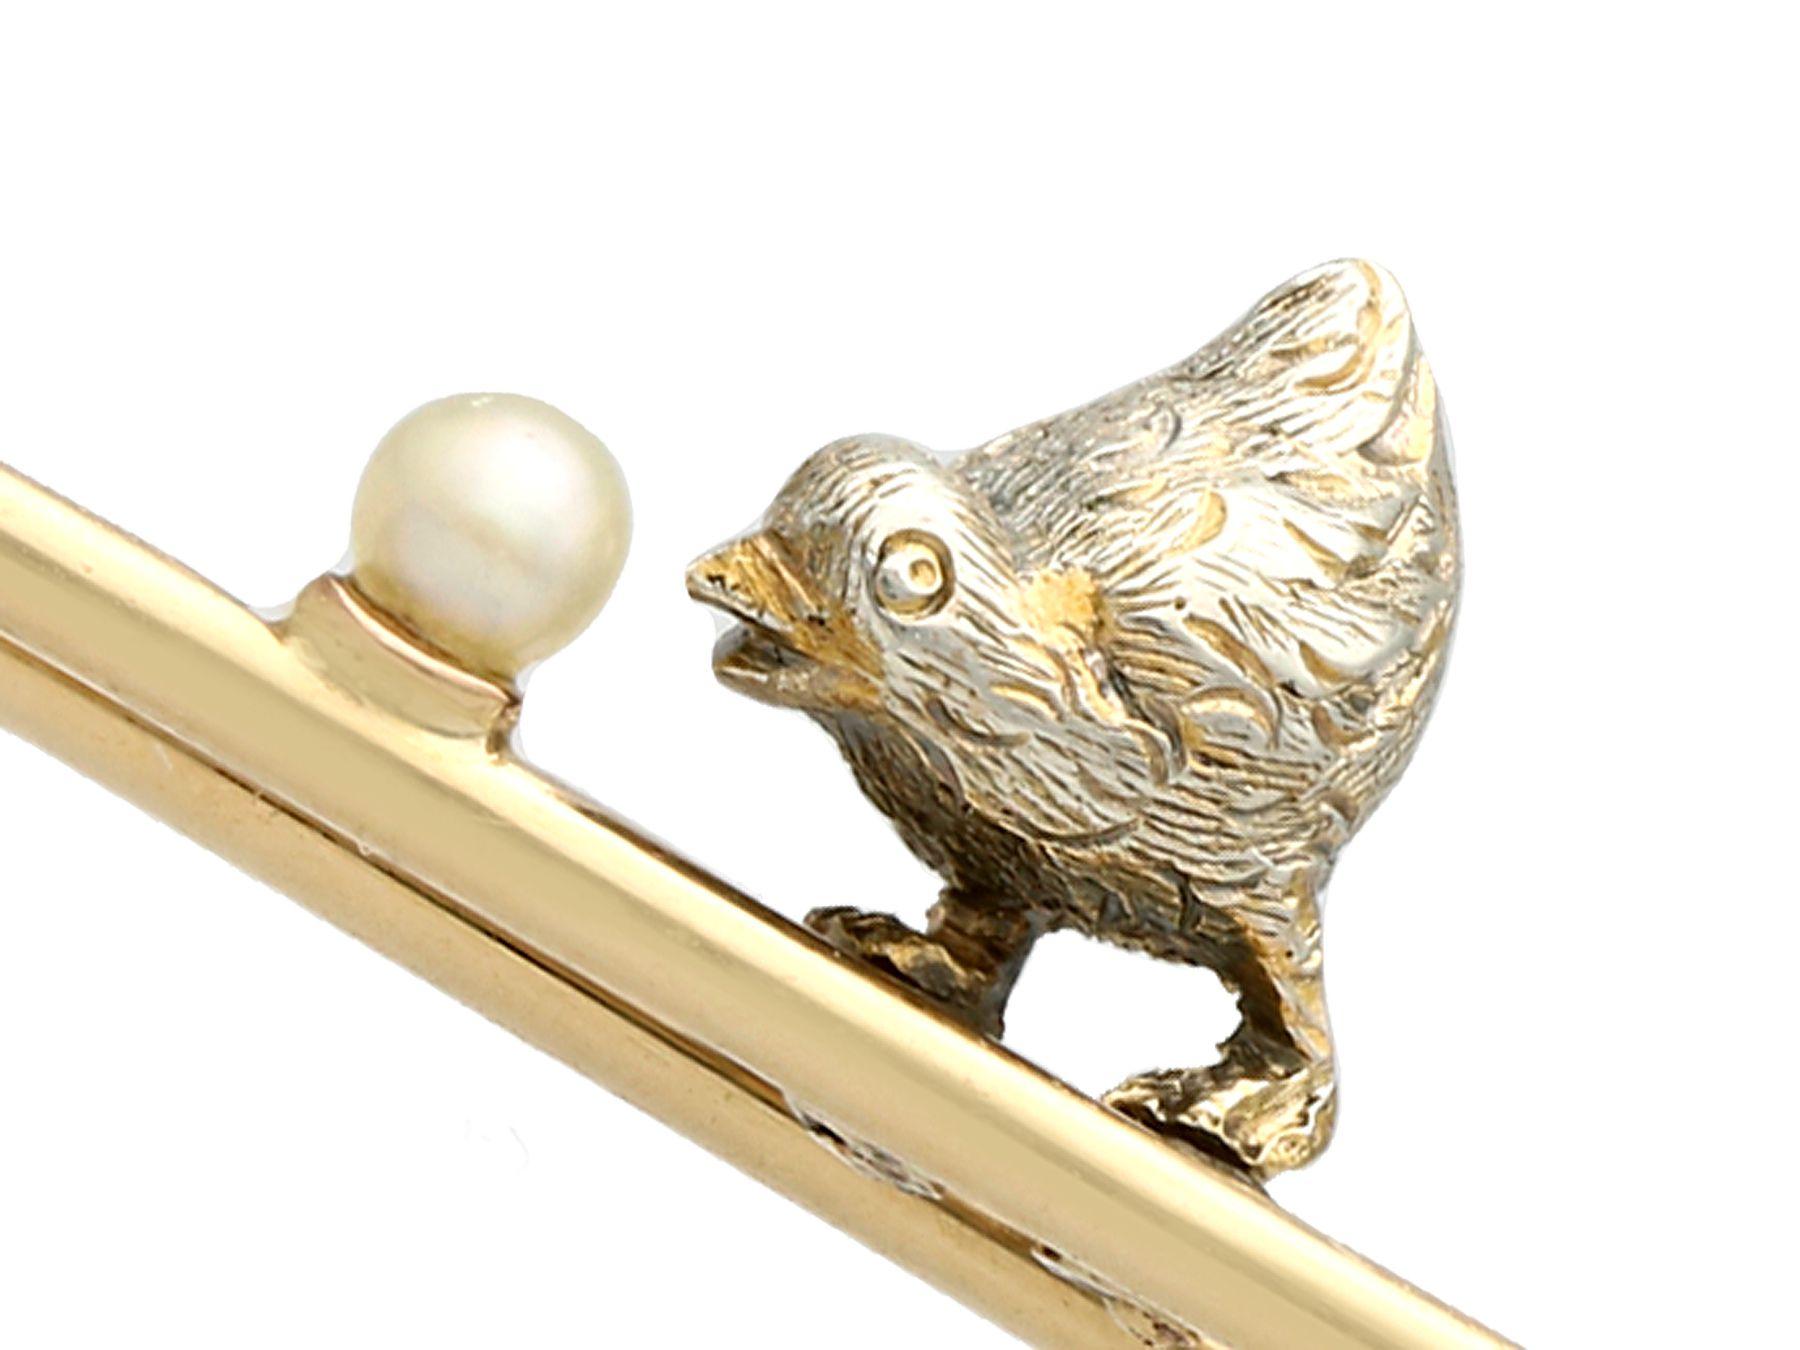 A fine and impressive antique seed pearl, 14k yellow gold and silver chick brooch; part of our diverse antique jewelry and estate jewelry collections

This fine and impressive antique brooch has been crafted in 14k yellow gold and silver.

The 1890s